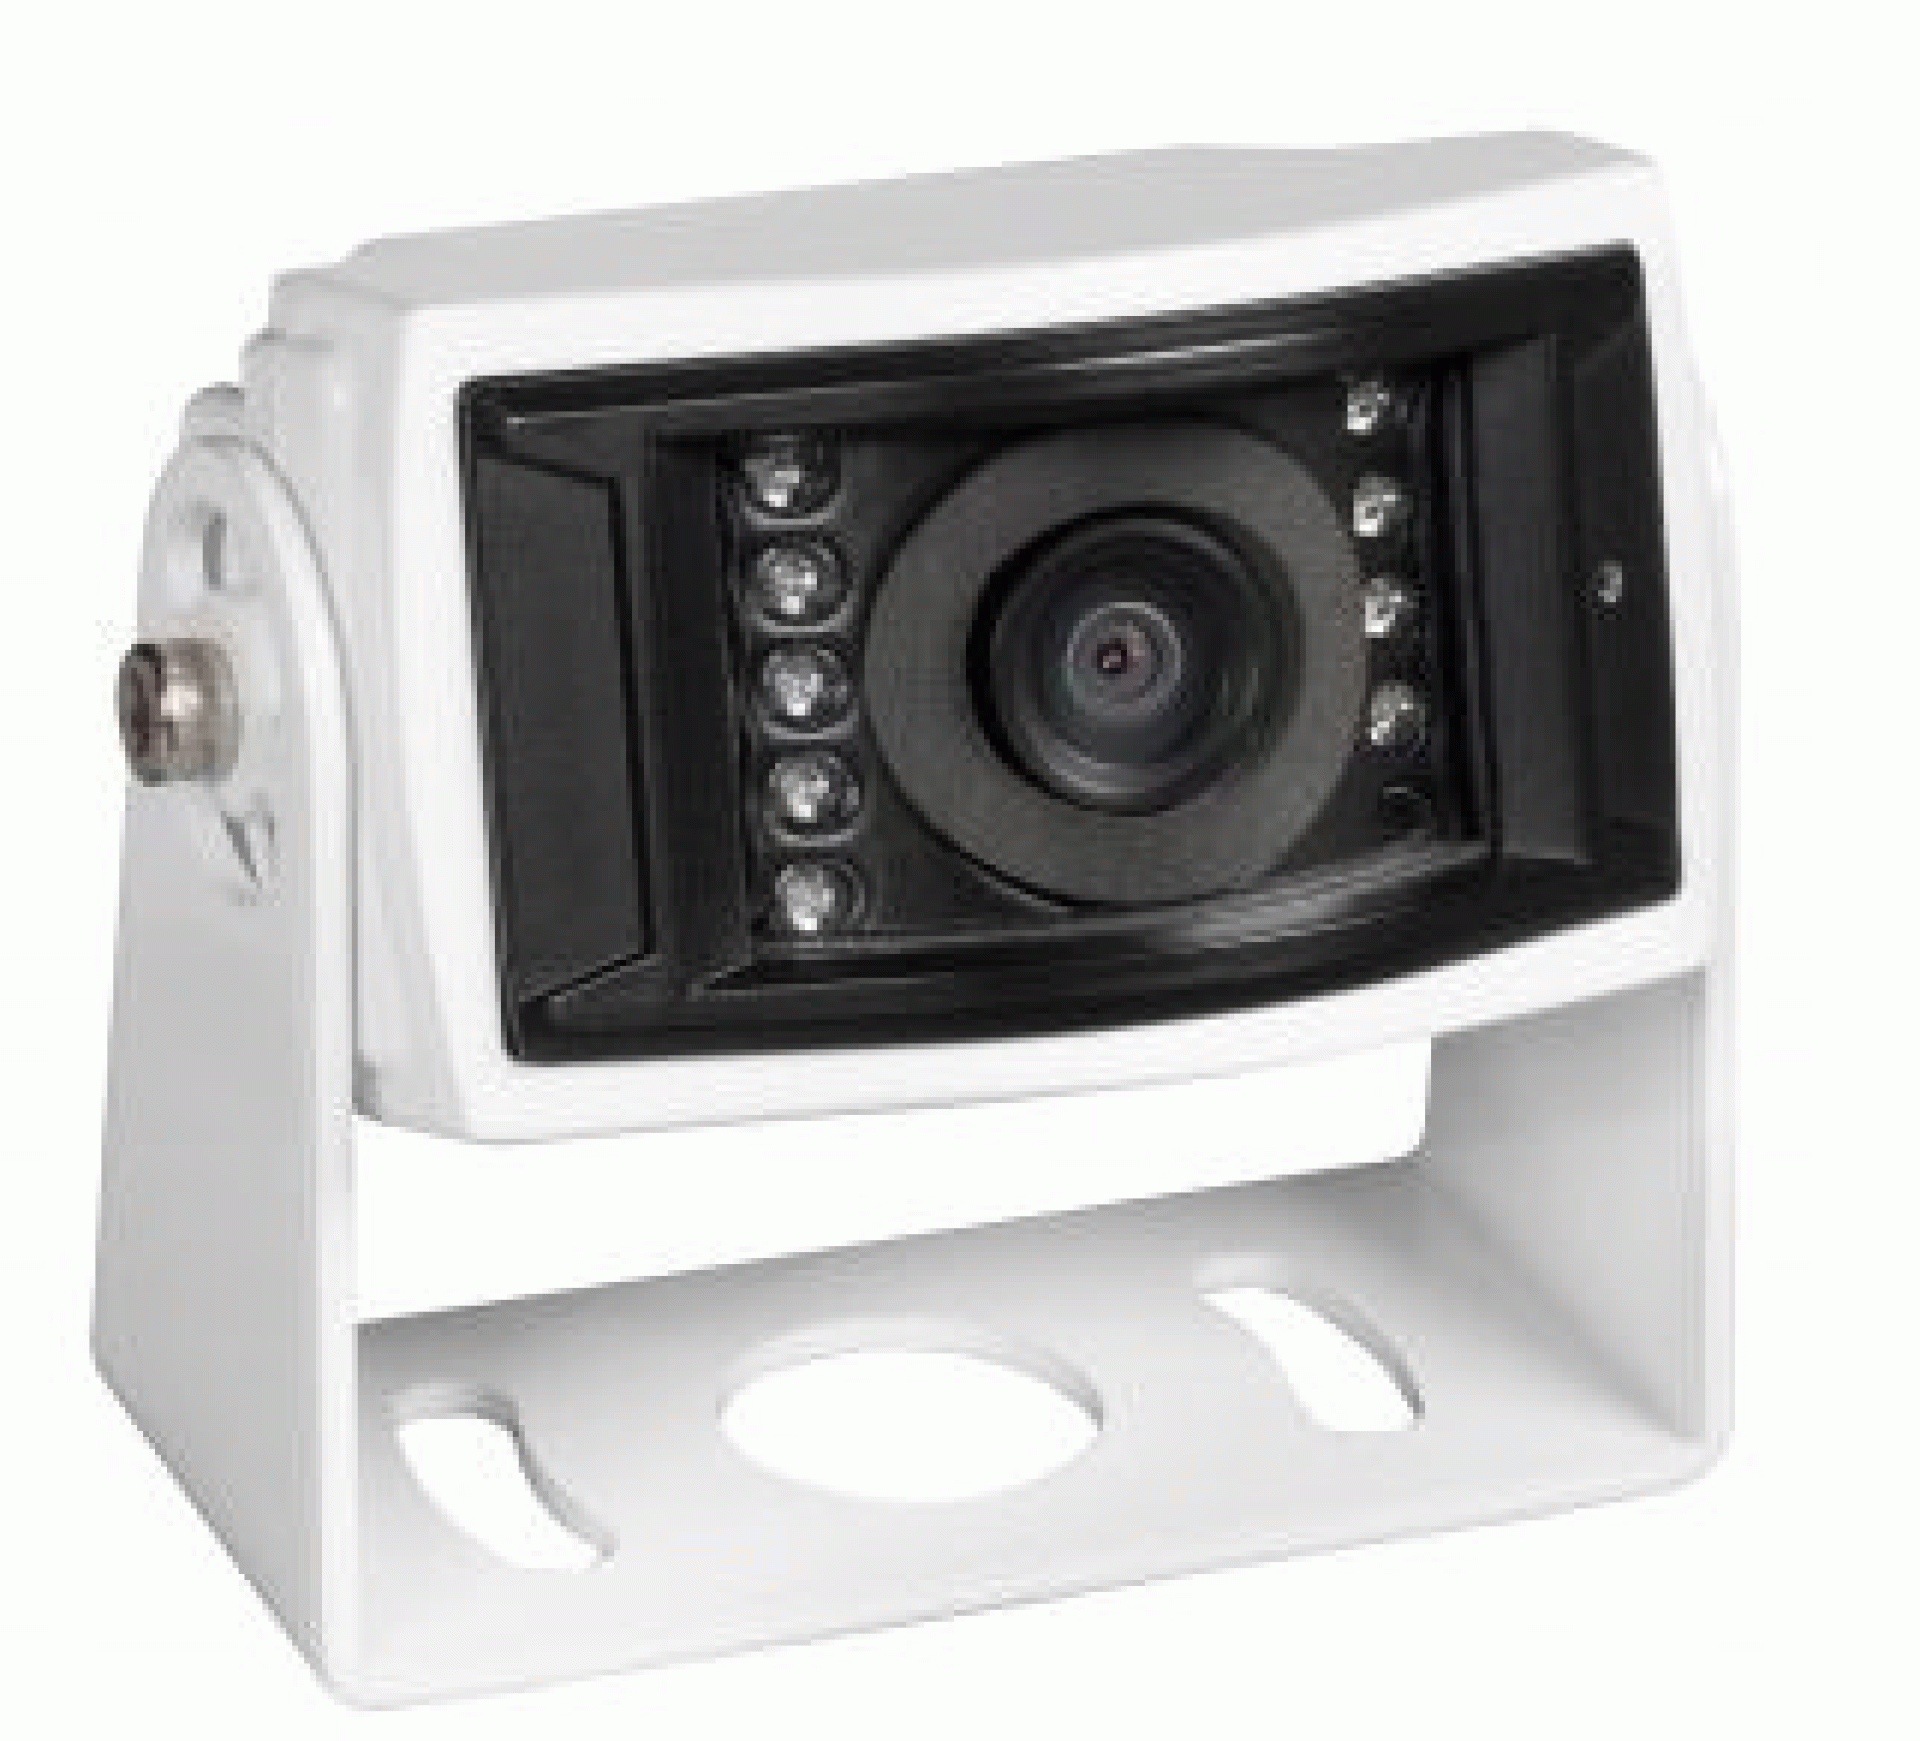 ASA / Jensen | VCCS155 | 155 DEGREE VIEWING ANGLE REAR CCD W/ LED LOW LIGHT ASSIST - WHITE